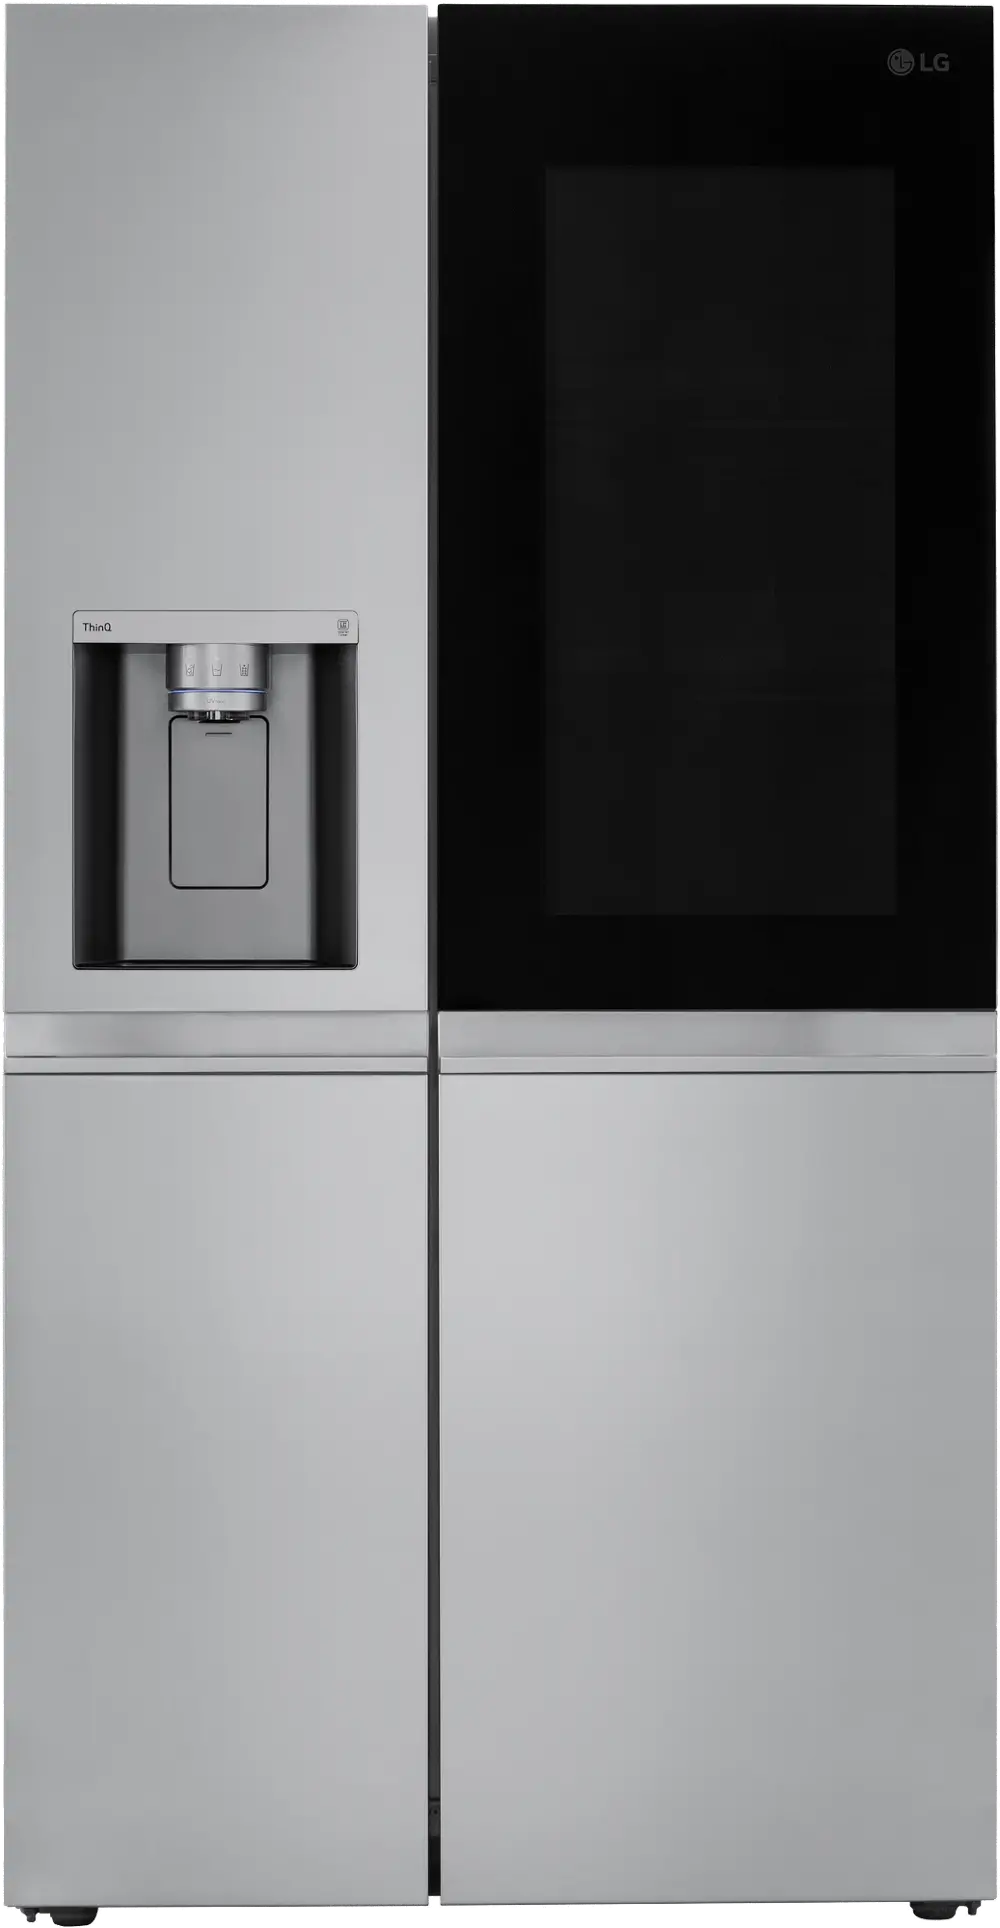 LRSOS2706S LG 26.8 cu ft Side by Side Refrigerator - Stainless Steel-1